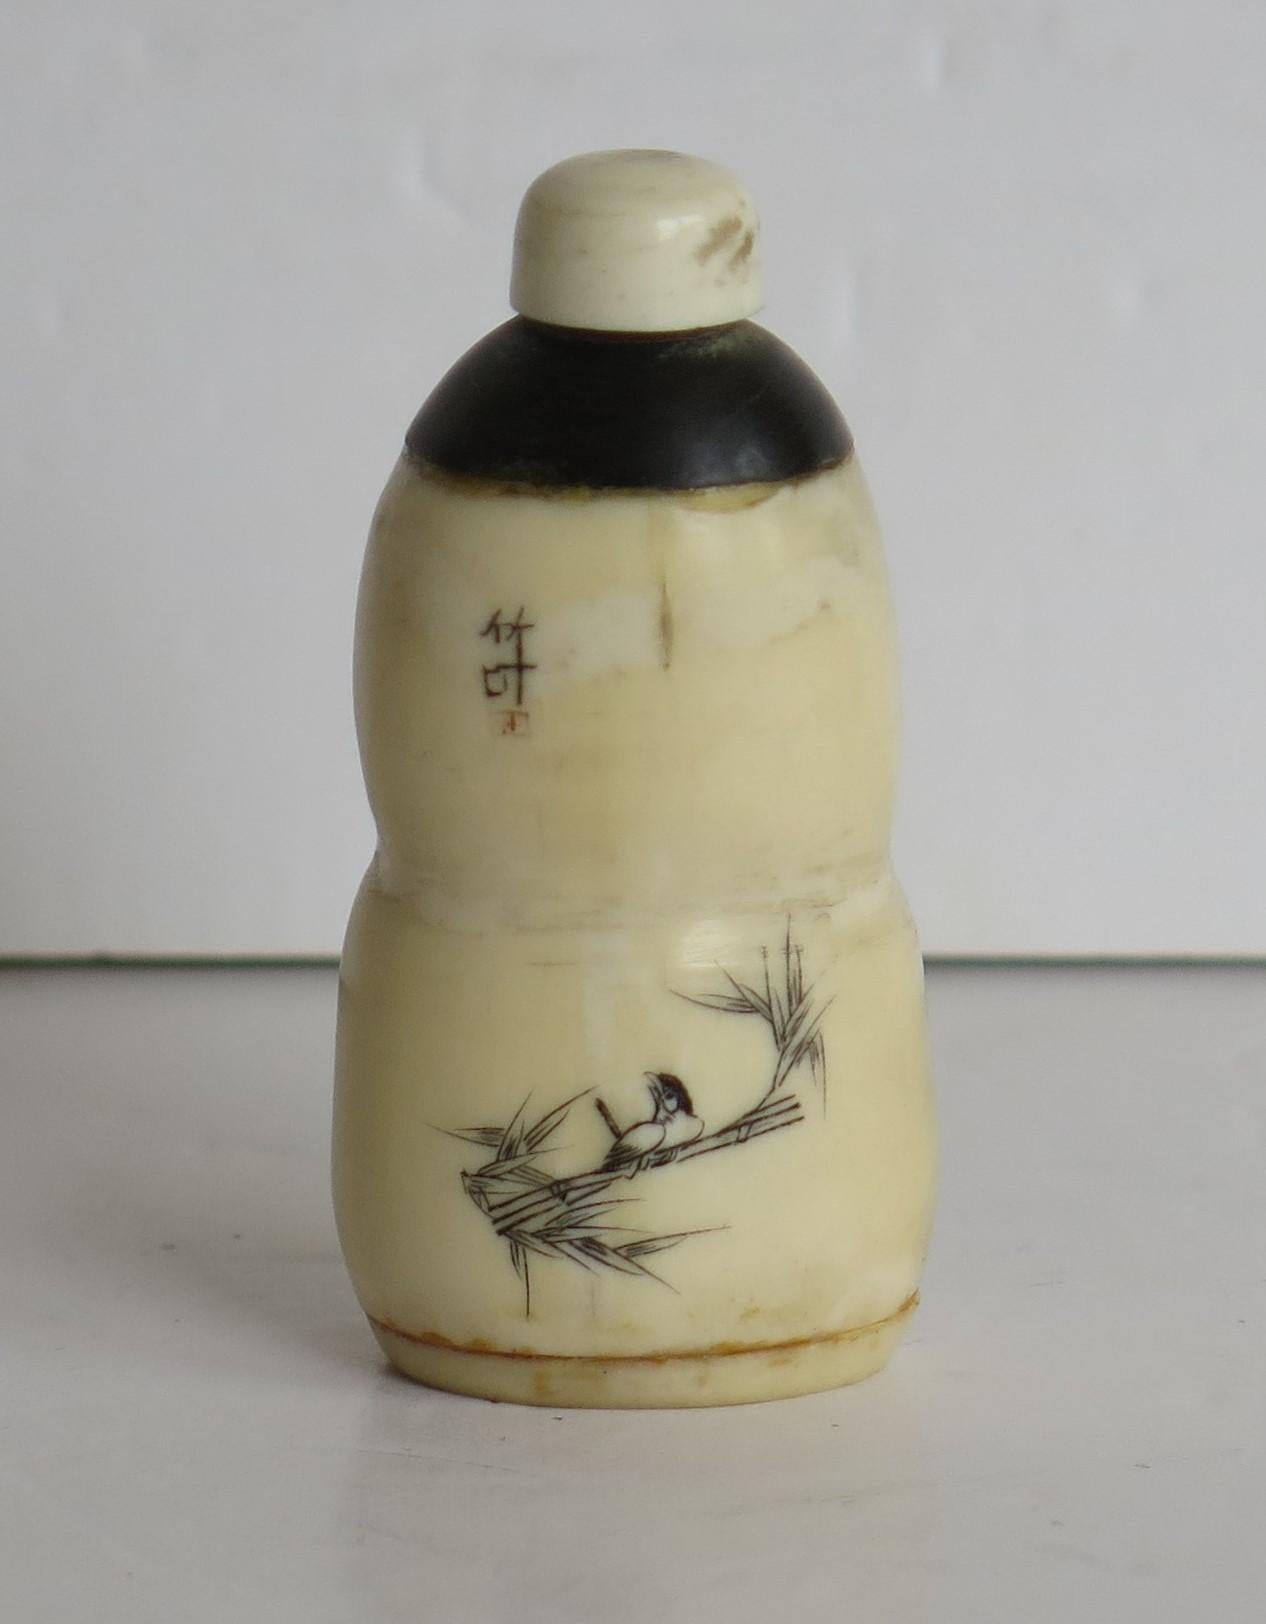 This is a very good Chinese hand carved, Bone Snuff Bottle with an engraved and inked bird decoration, which we date to the early 19th Century, circa 1830. 

The bottle is made of composite bovine bone, hand carved in a gourd shape, with a dome